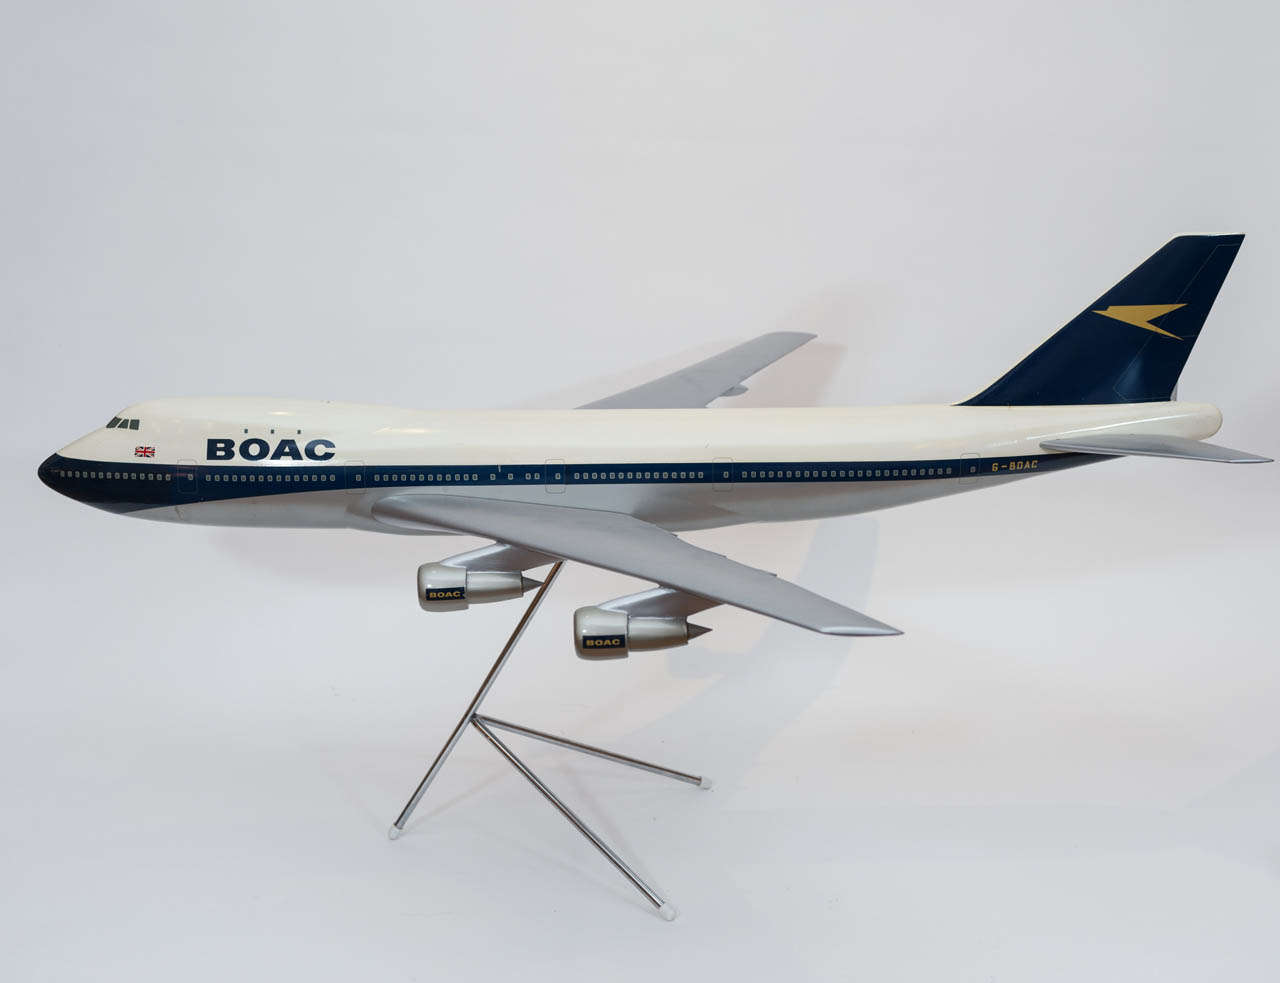 A cool and substantial model of
the iconic Boeing 747 made by Westwood Models of Great Britain for
The British Overseas Airways Corporation (BOAC)....purchased from
a travel agency by a collector.